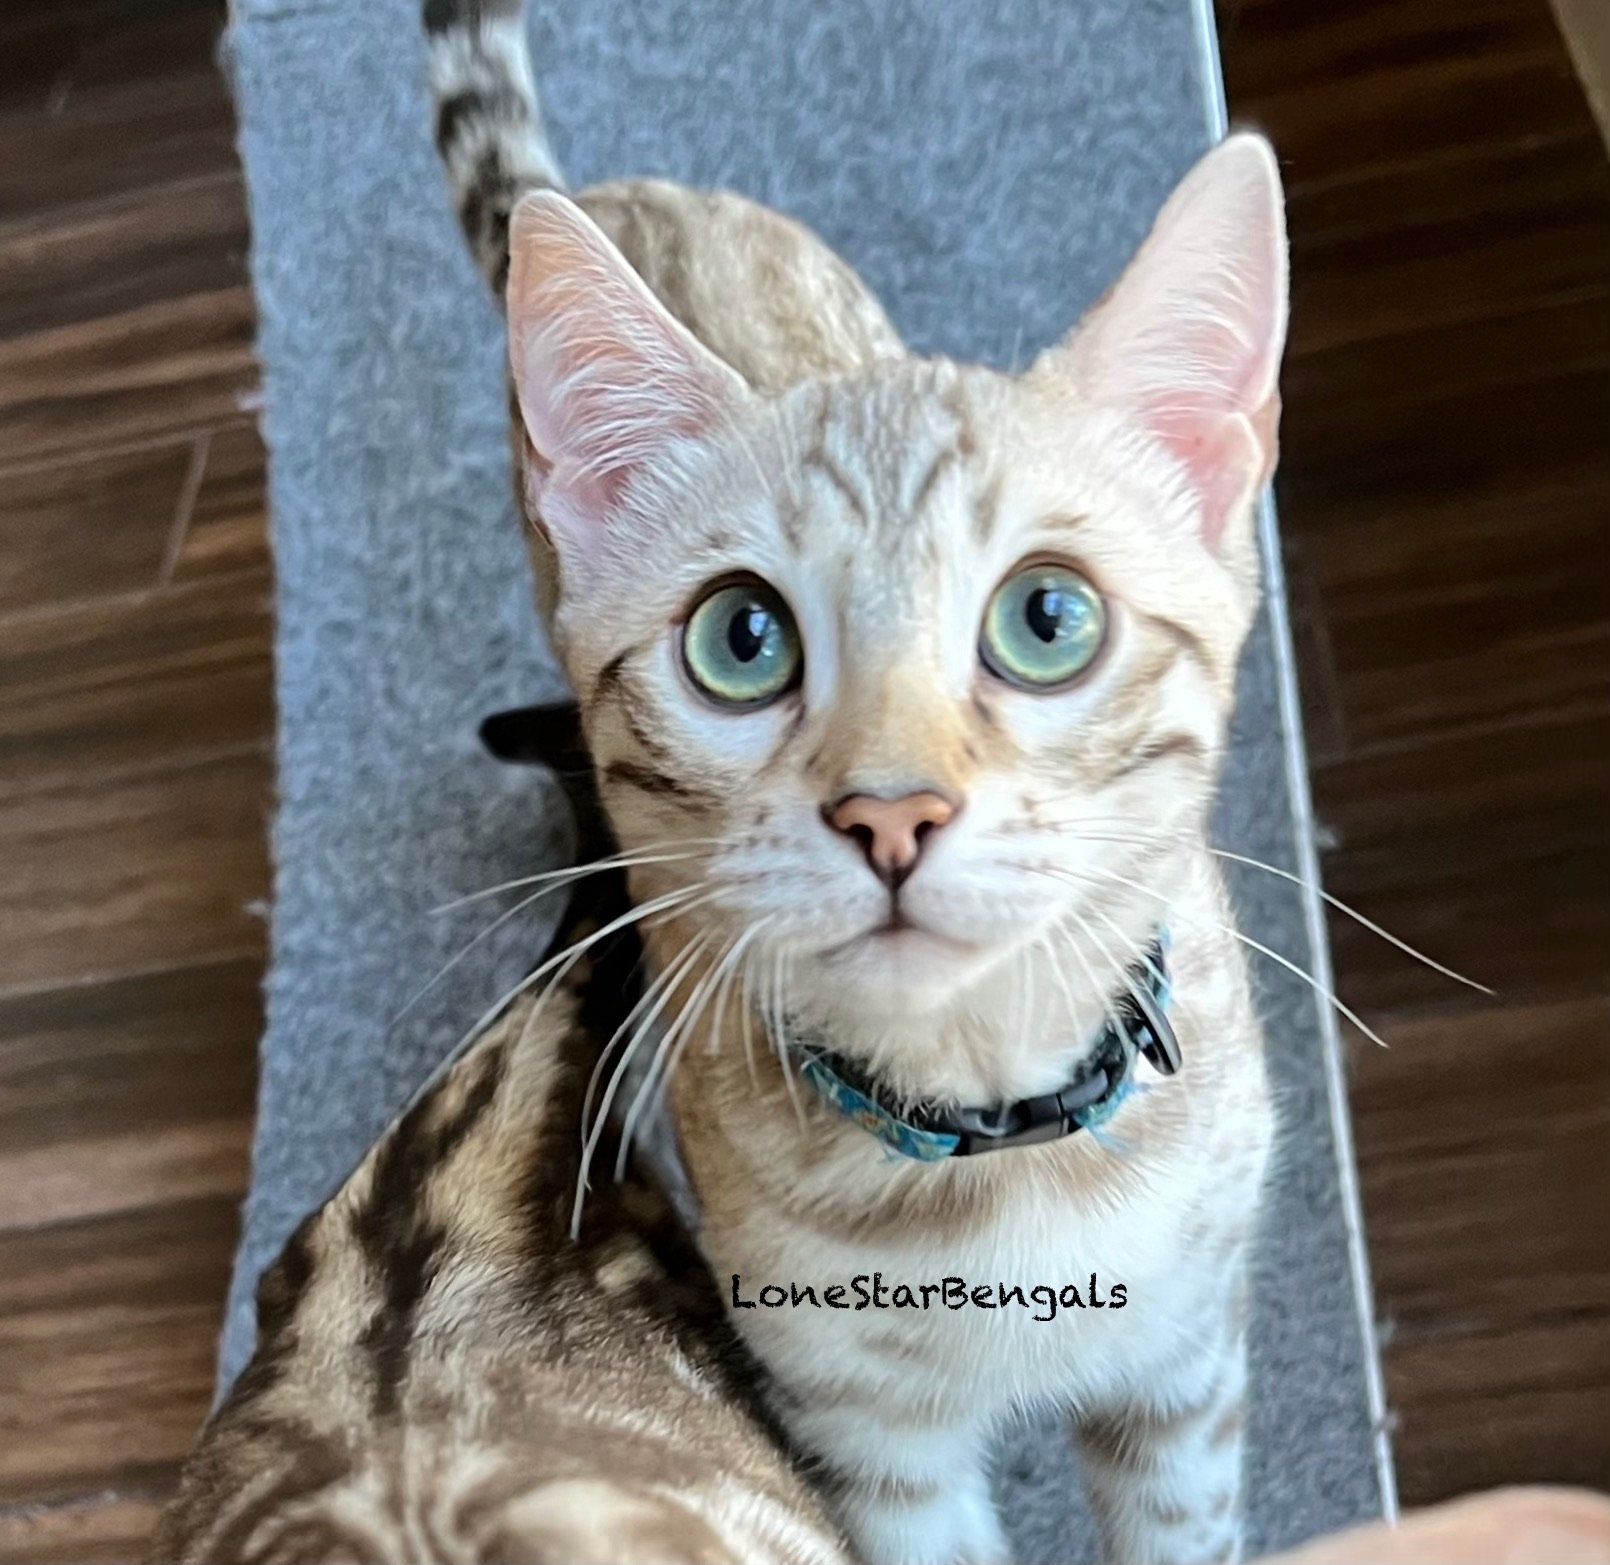 An Award-Winning Bengal Breeder from Texas passionately presents a cat with blue eyes standing on top of a mat.